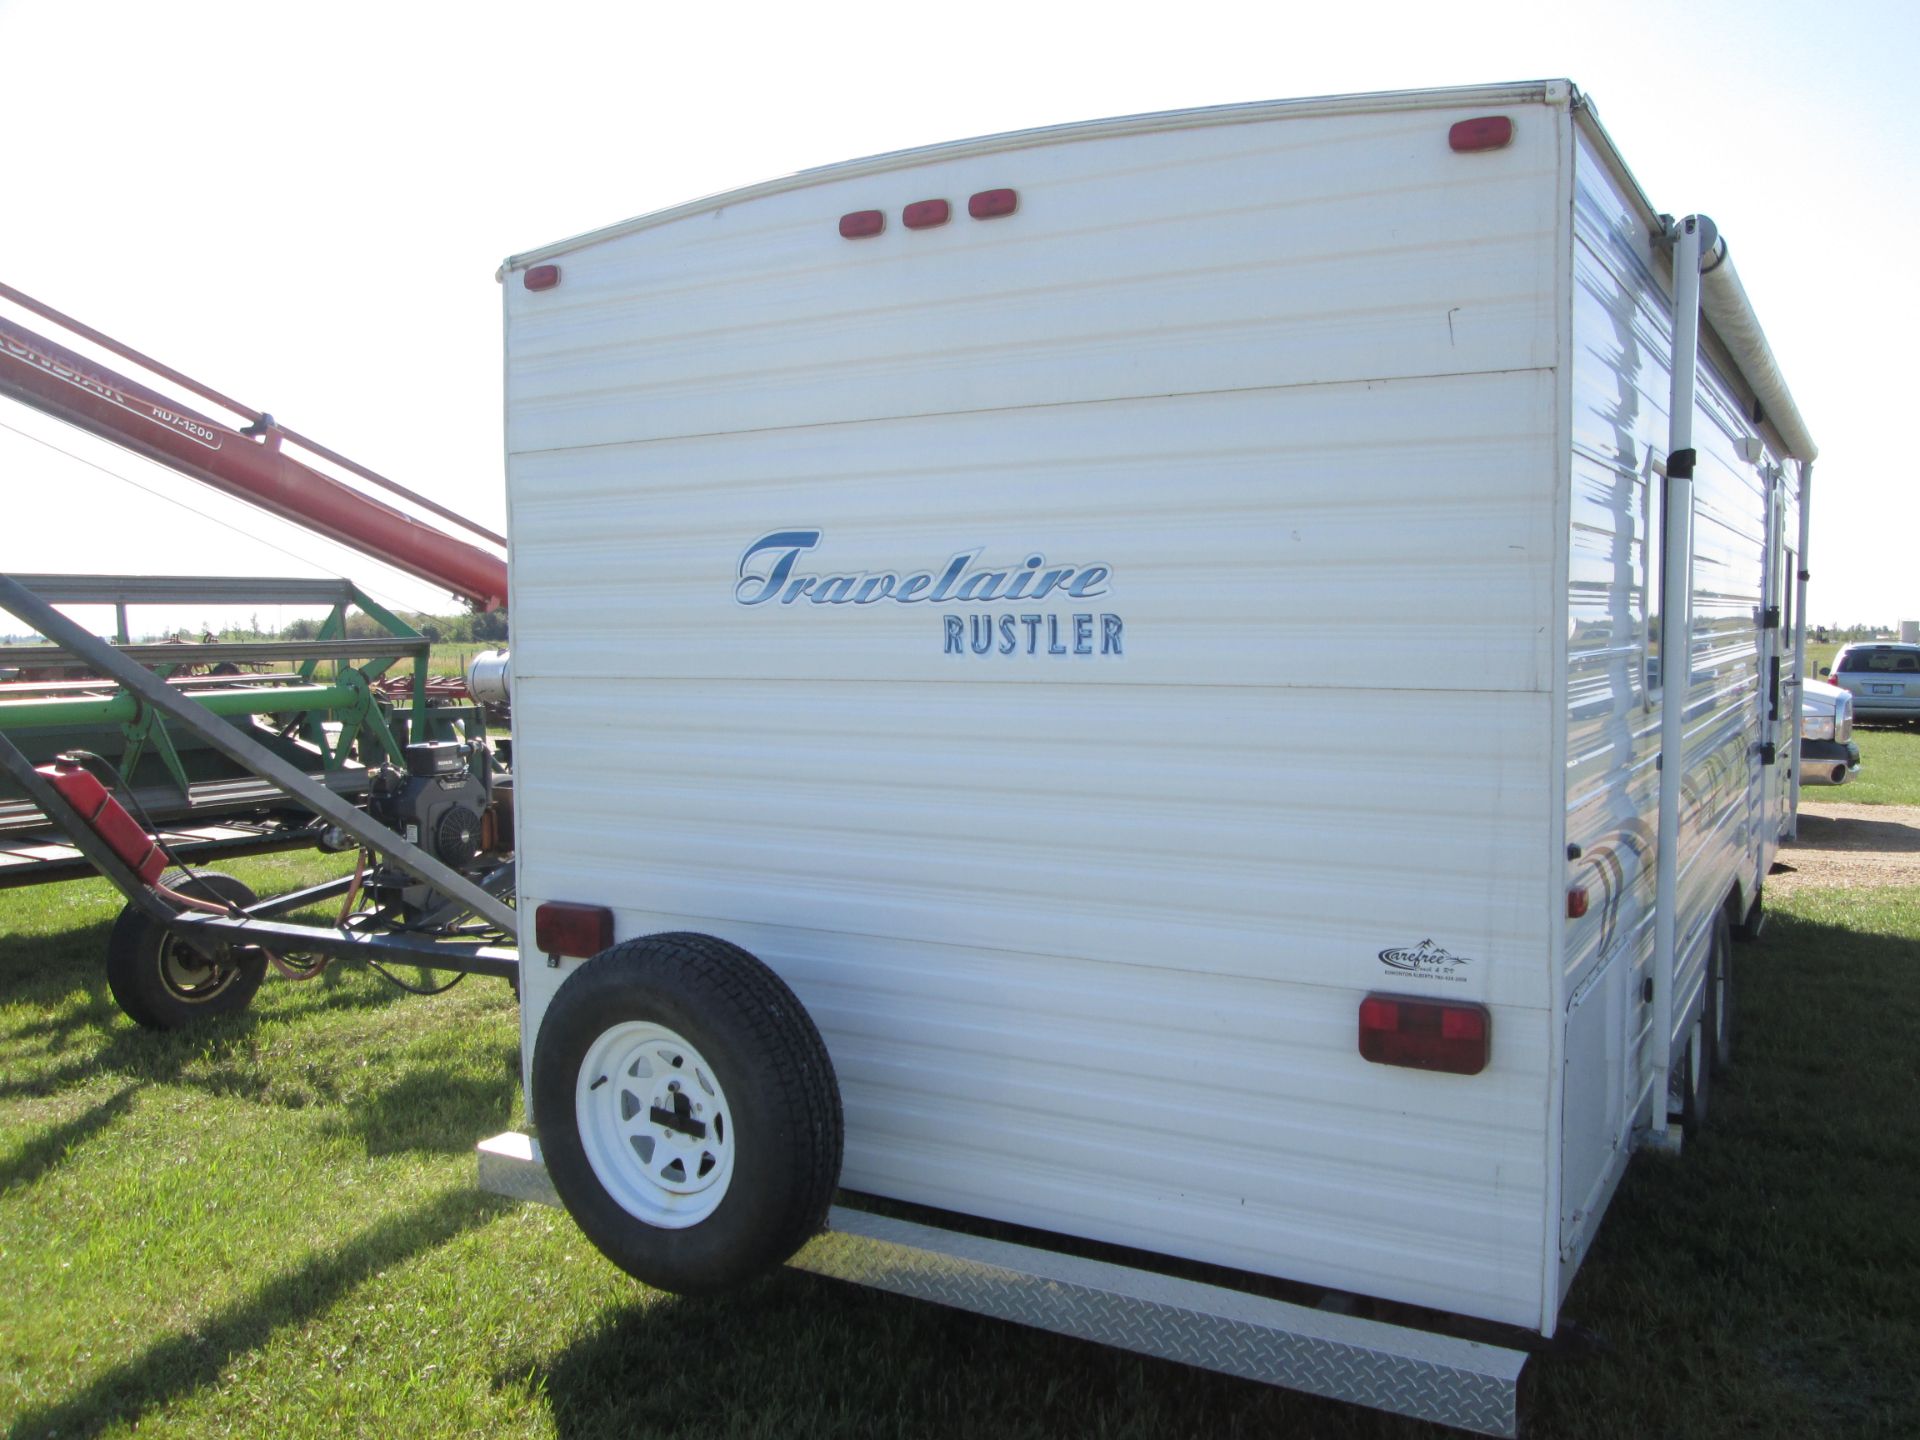 26.5' 2004 TRAVELAIRE BUMPER PULL HOLIDAY TRAILER - Image 3 of 3